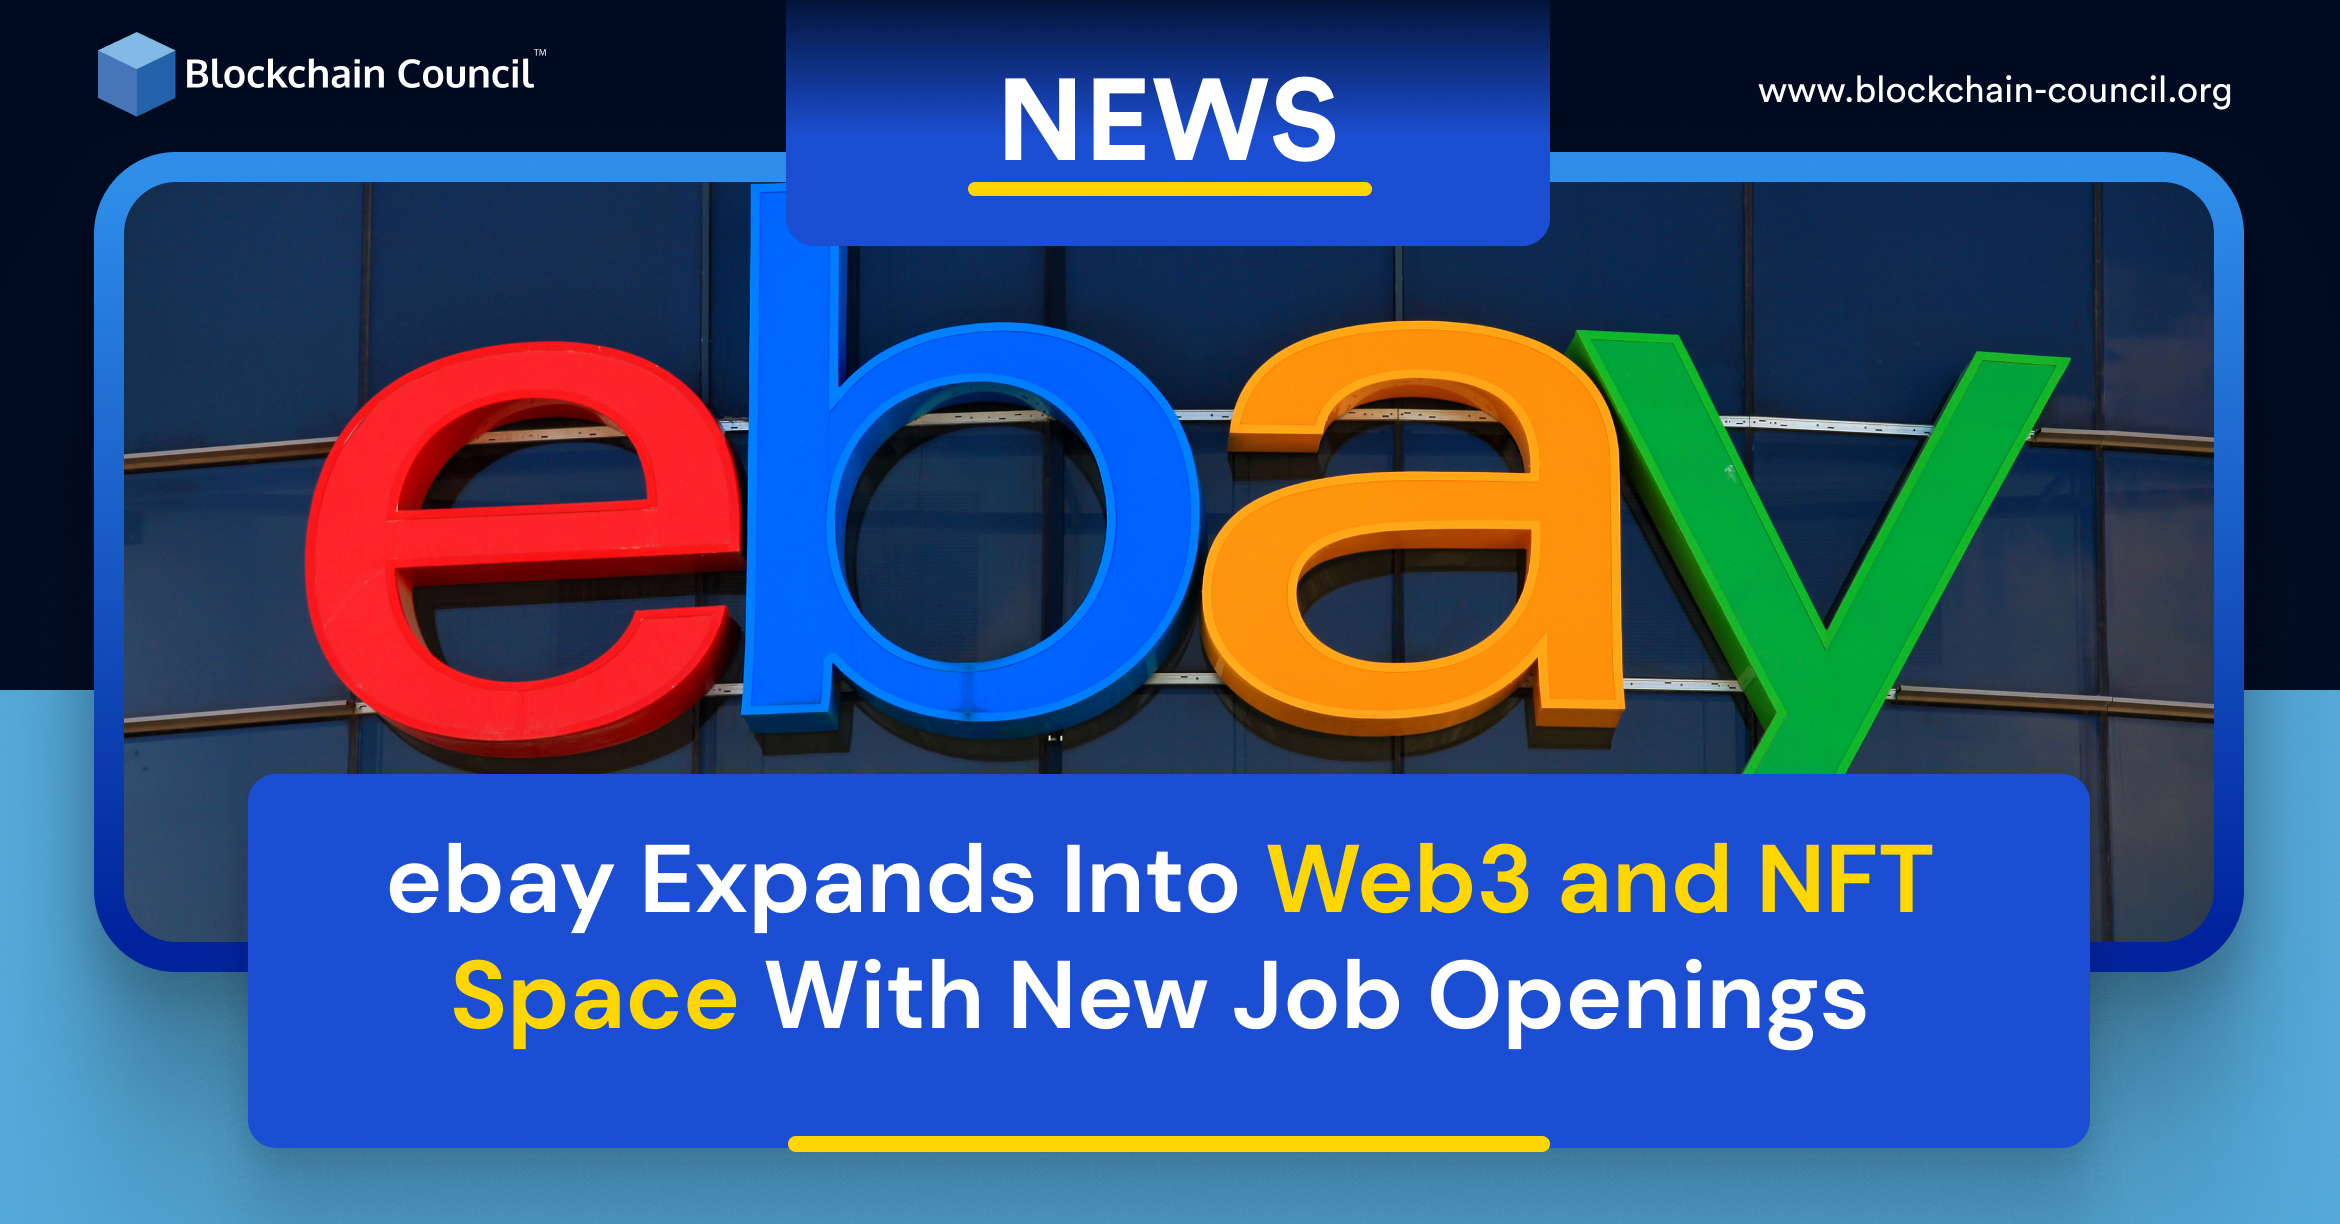 eBay Expands Into Web3 and NFT Space With New Job Openings